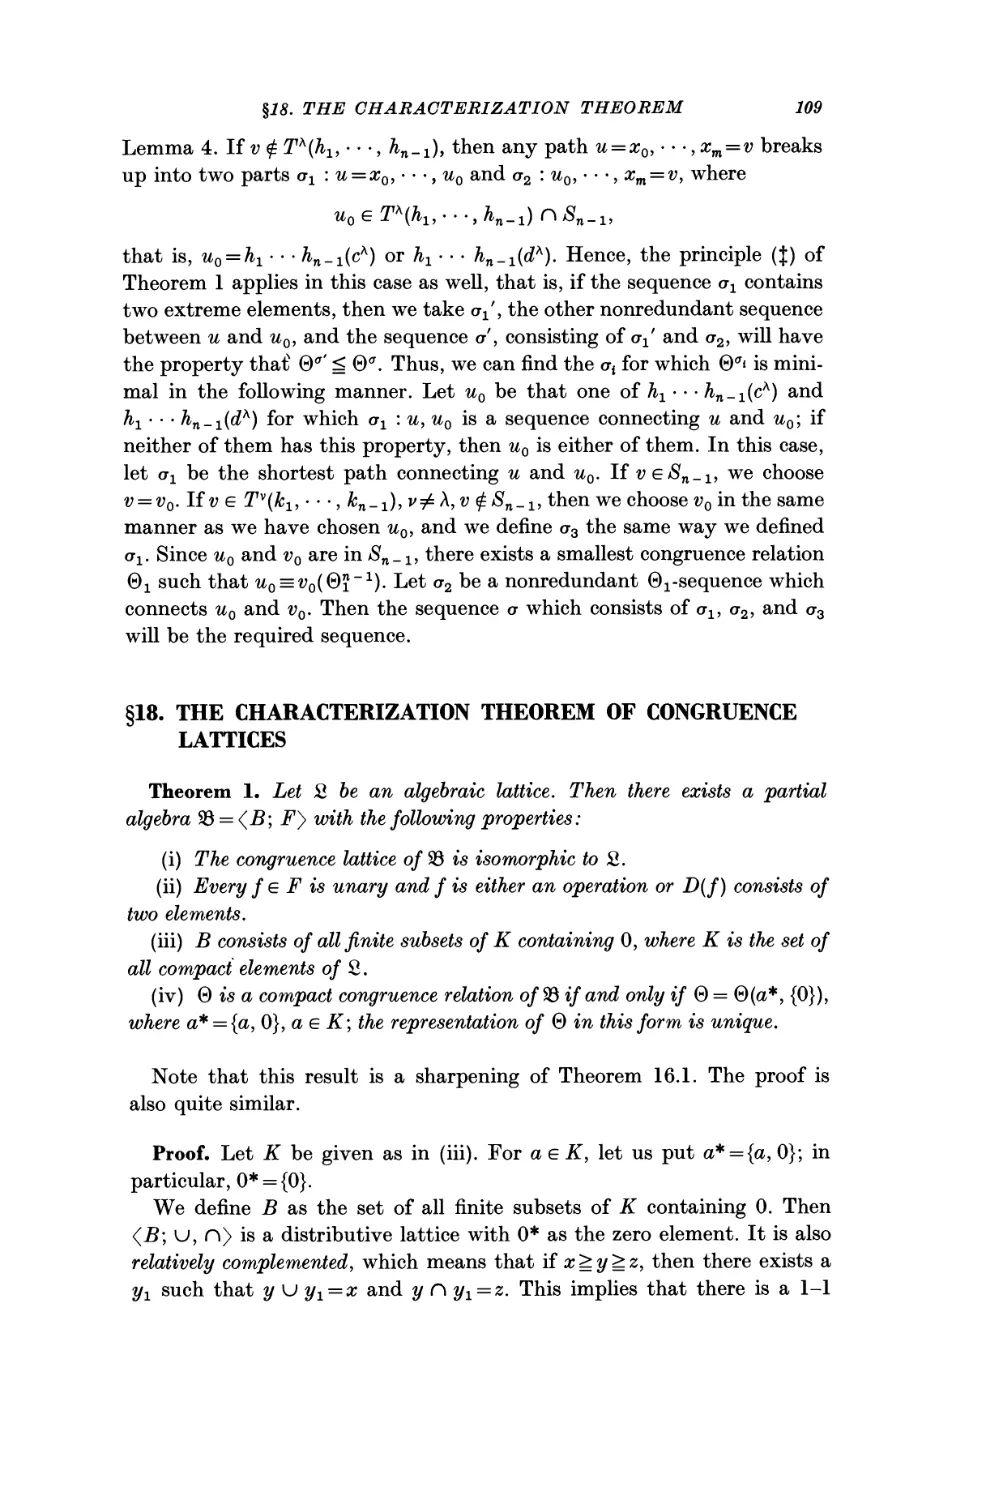 §18. The Characterization Theorem of Congruence Lattices